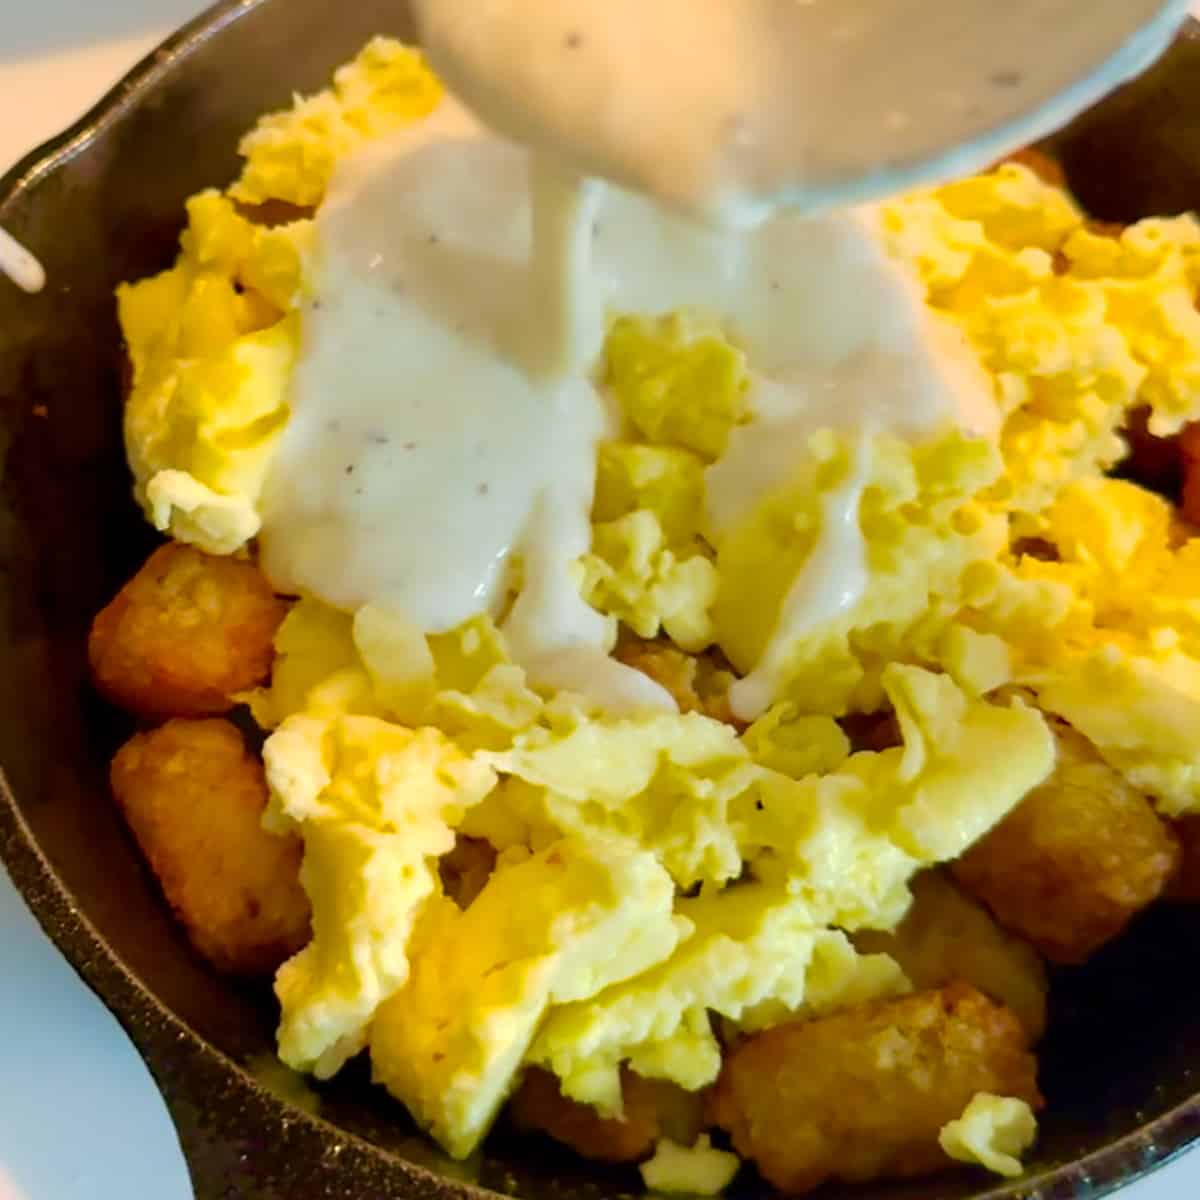 pouring gravy on tater tots and scrambled eggs.